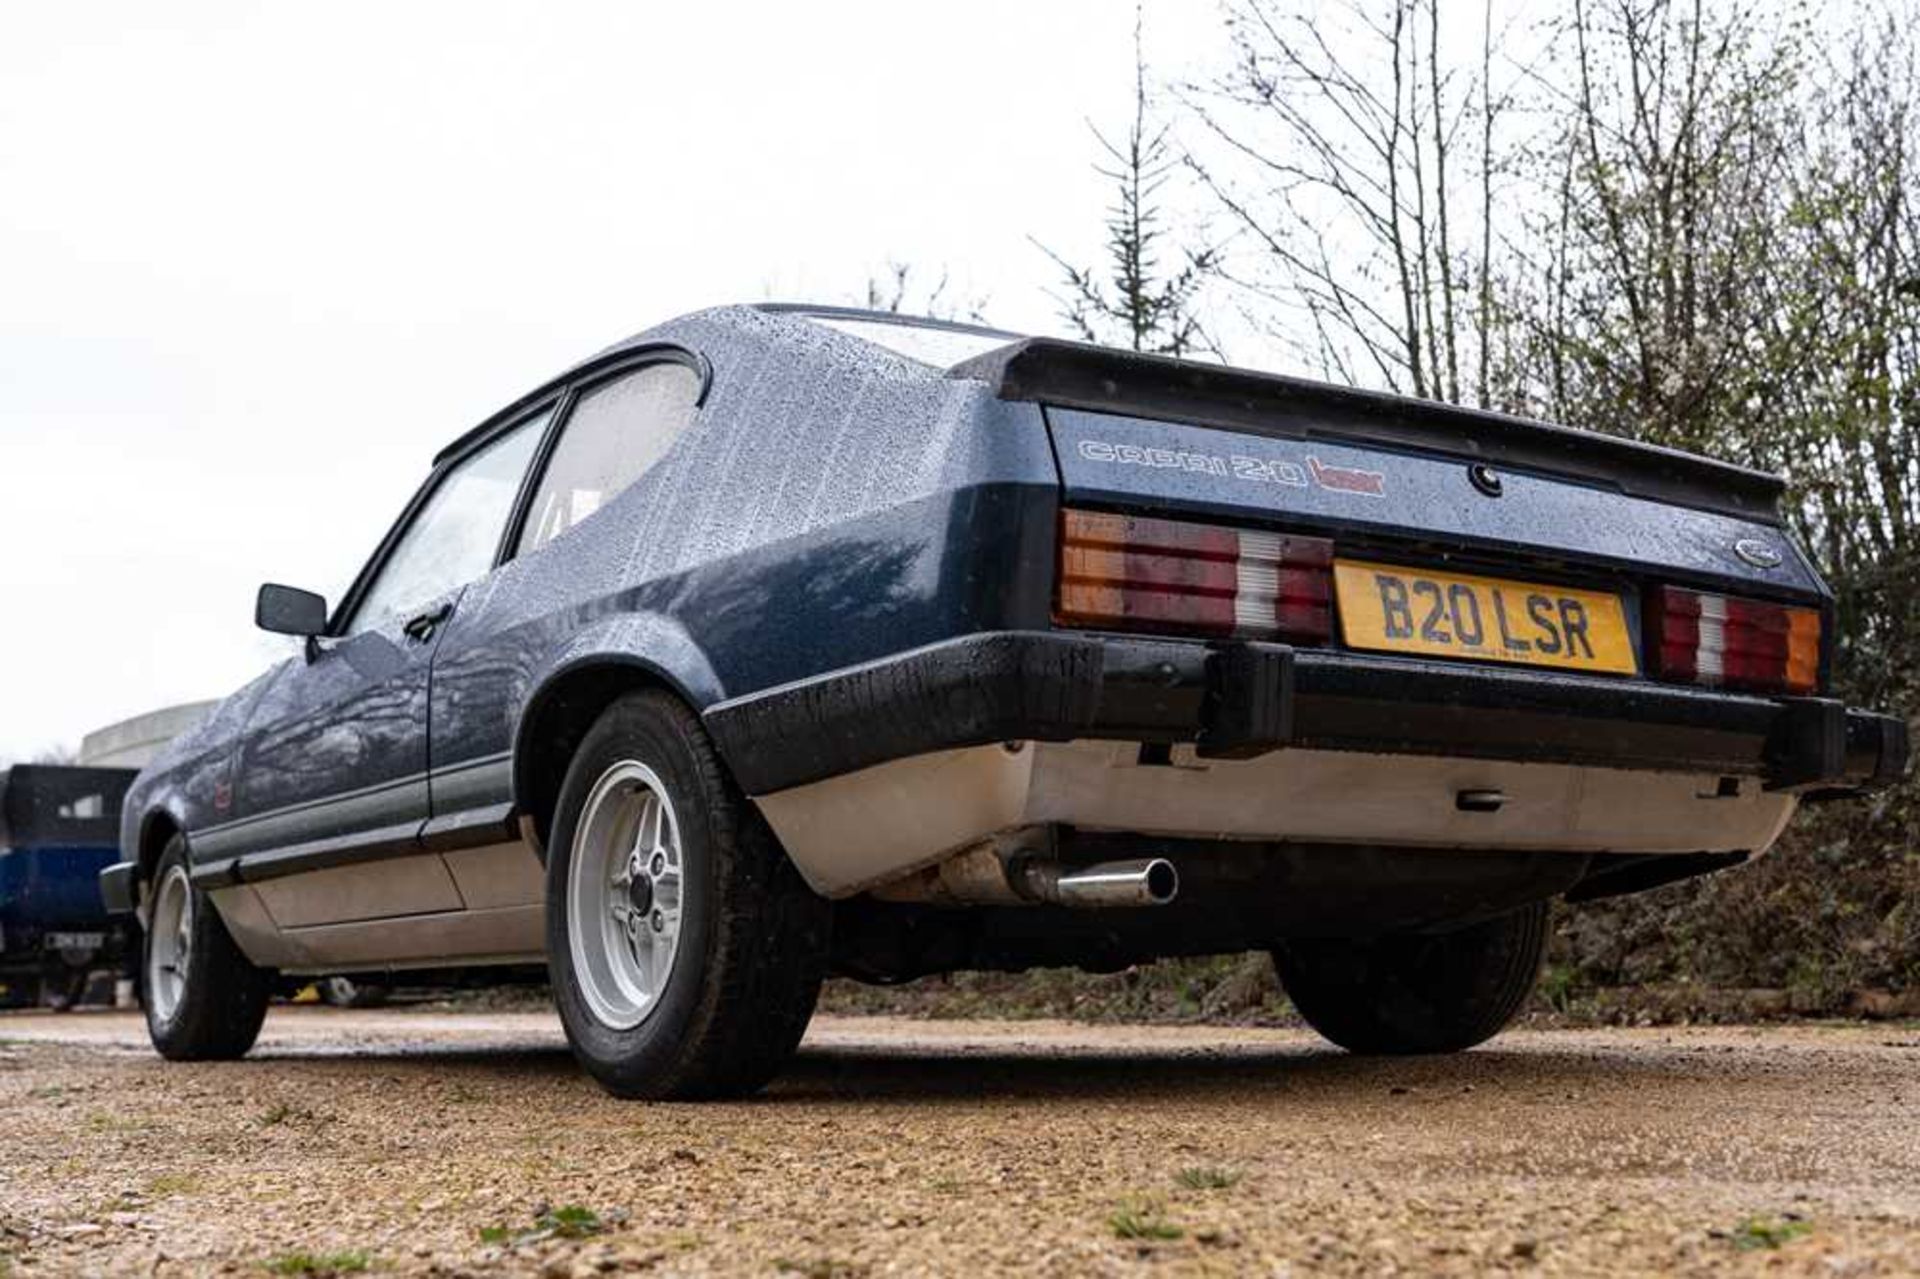 1985 Ford Capri Laser 2.0 Litre Warranted 55,300 miles from new - Image 23 of 67